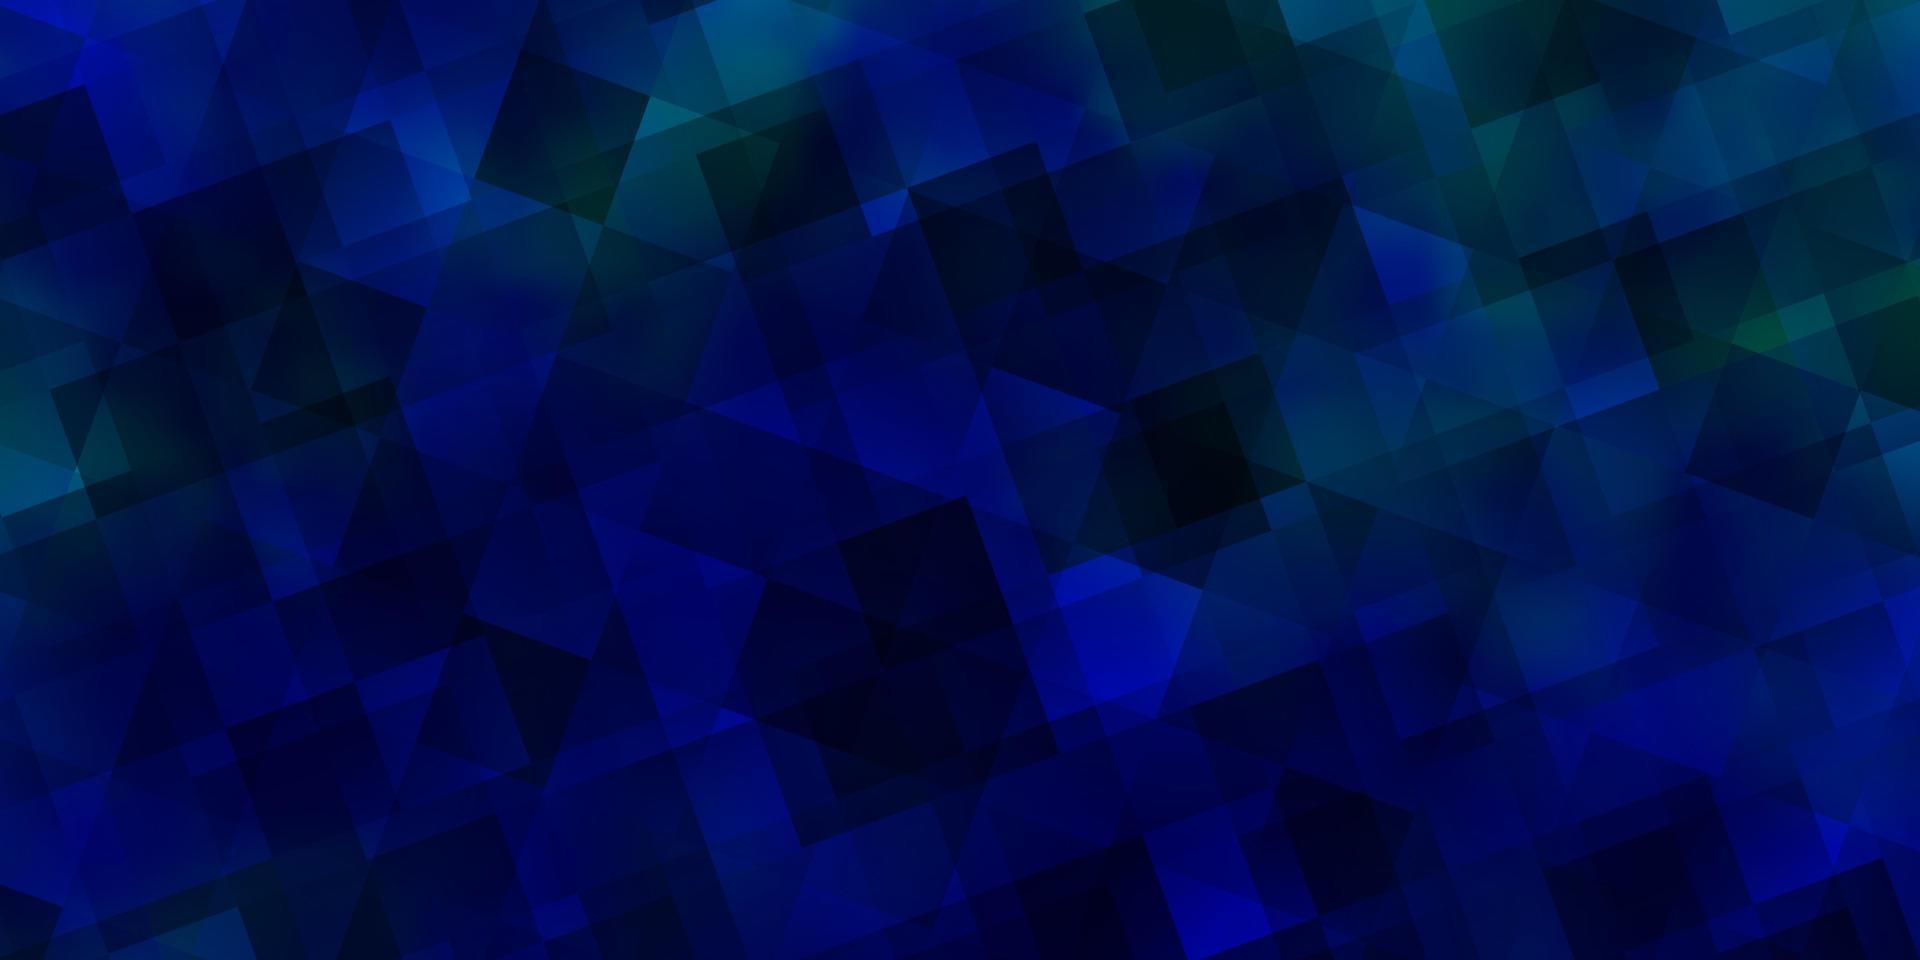 Light BLUE vector texture with triangular style.